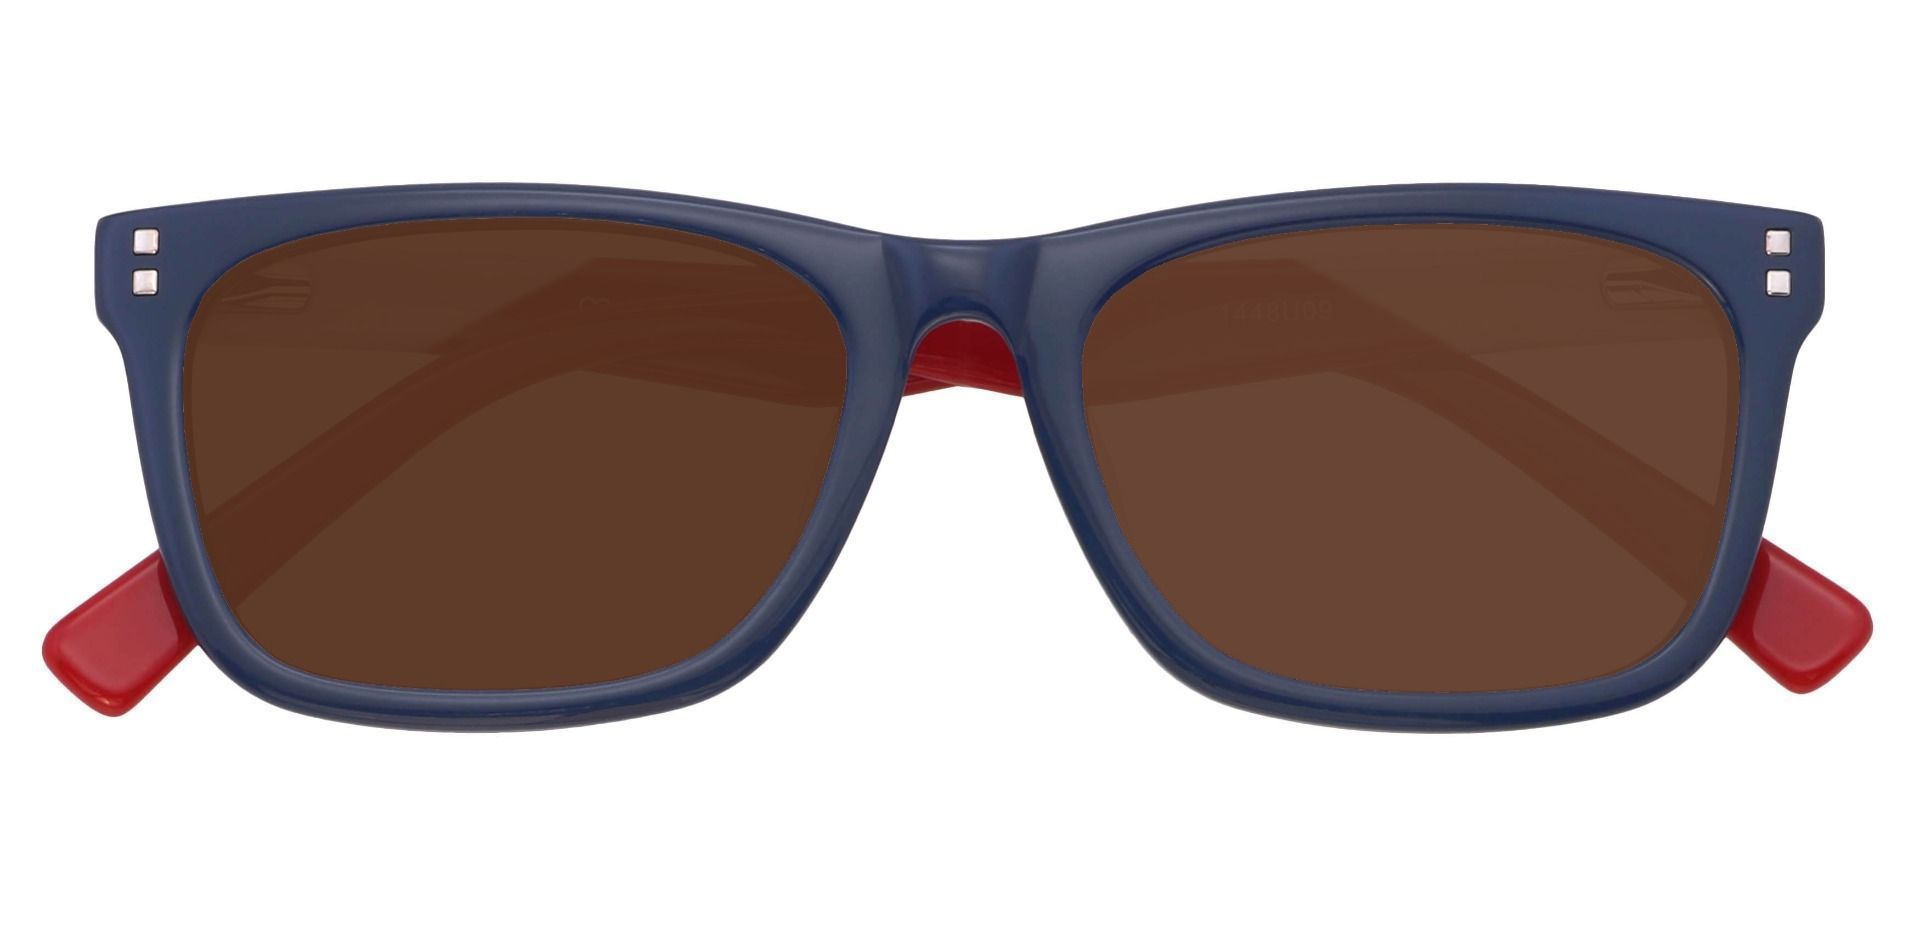 Quincy Rectangle Single Vision Sunglasses - Blue Frame With Brown Lenses